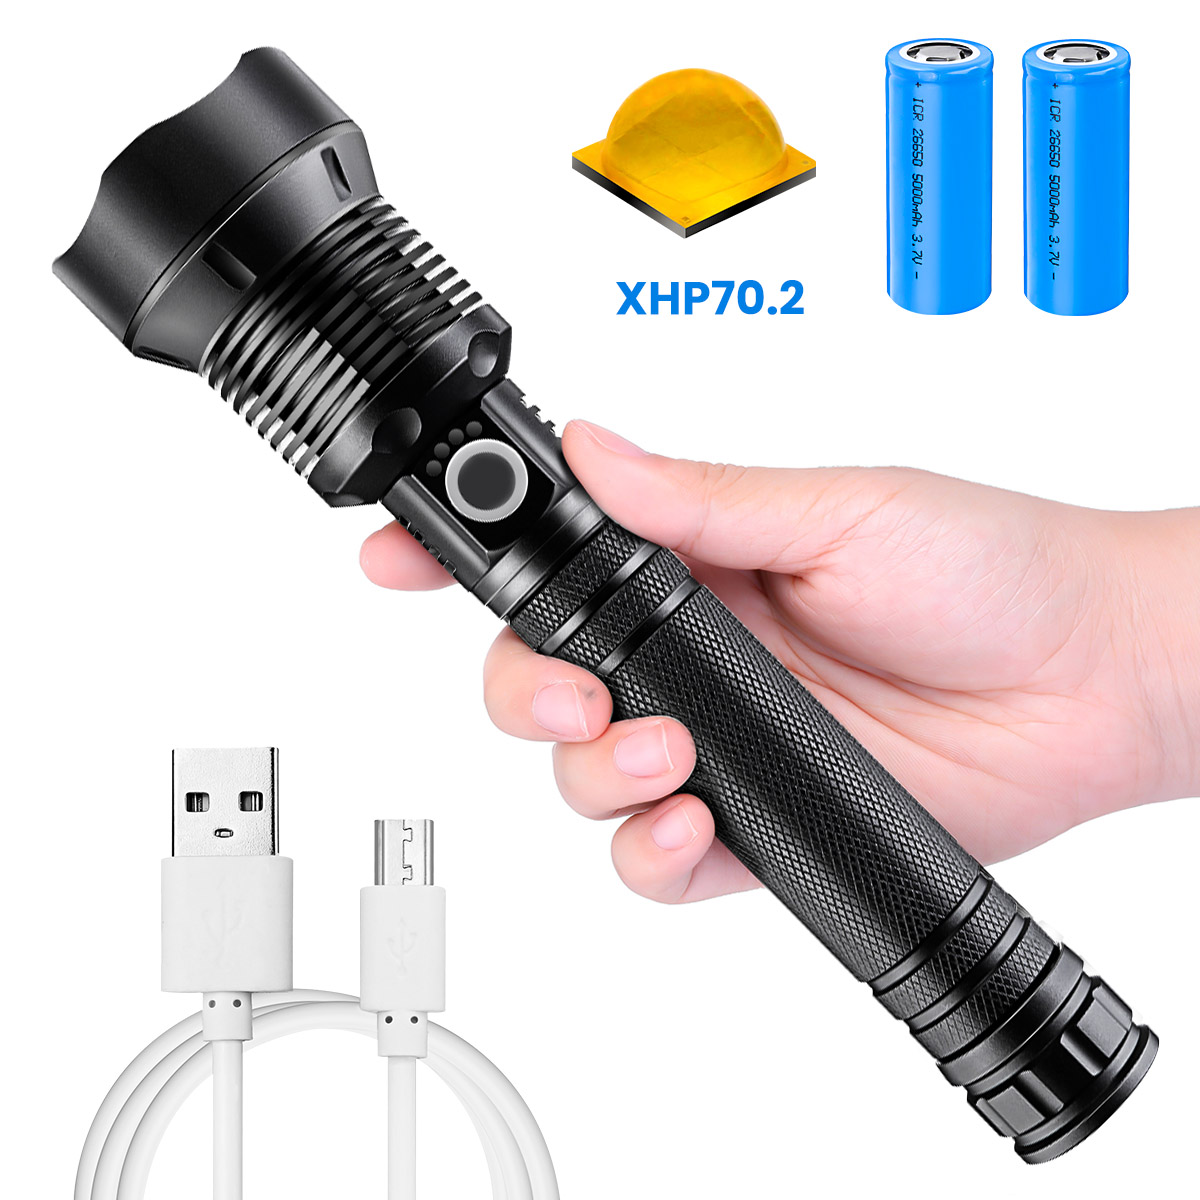 XHP702-900LM-Zoomable-LED-Flashlight-Kit-with-2x-26650-Li-ion-Battery-USB-Rechargeable-Super-Bright--1714246-1